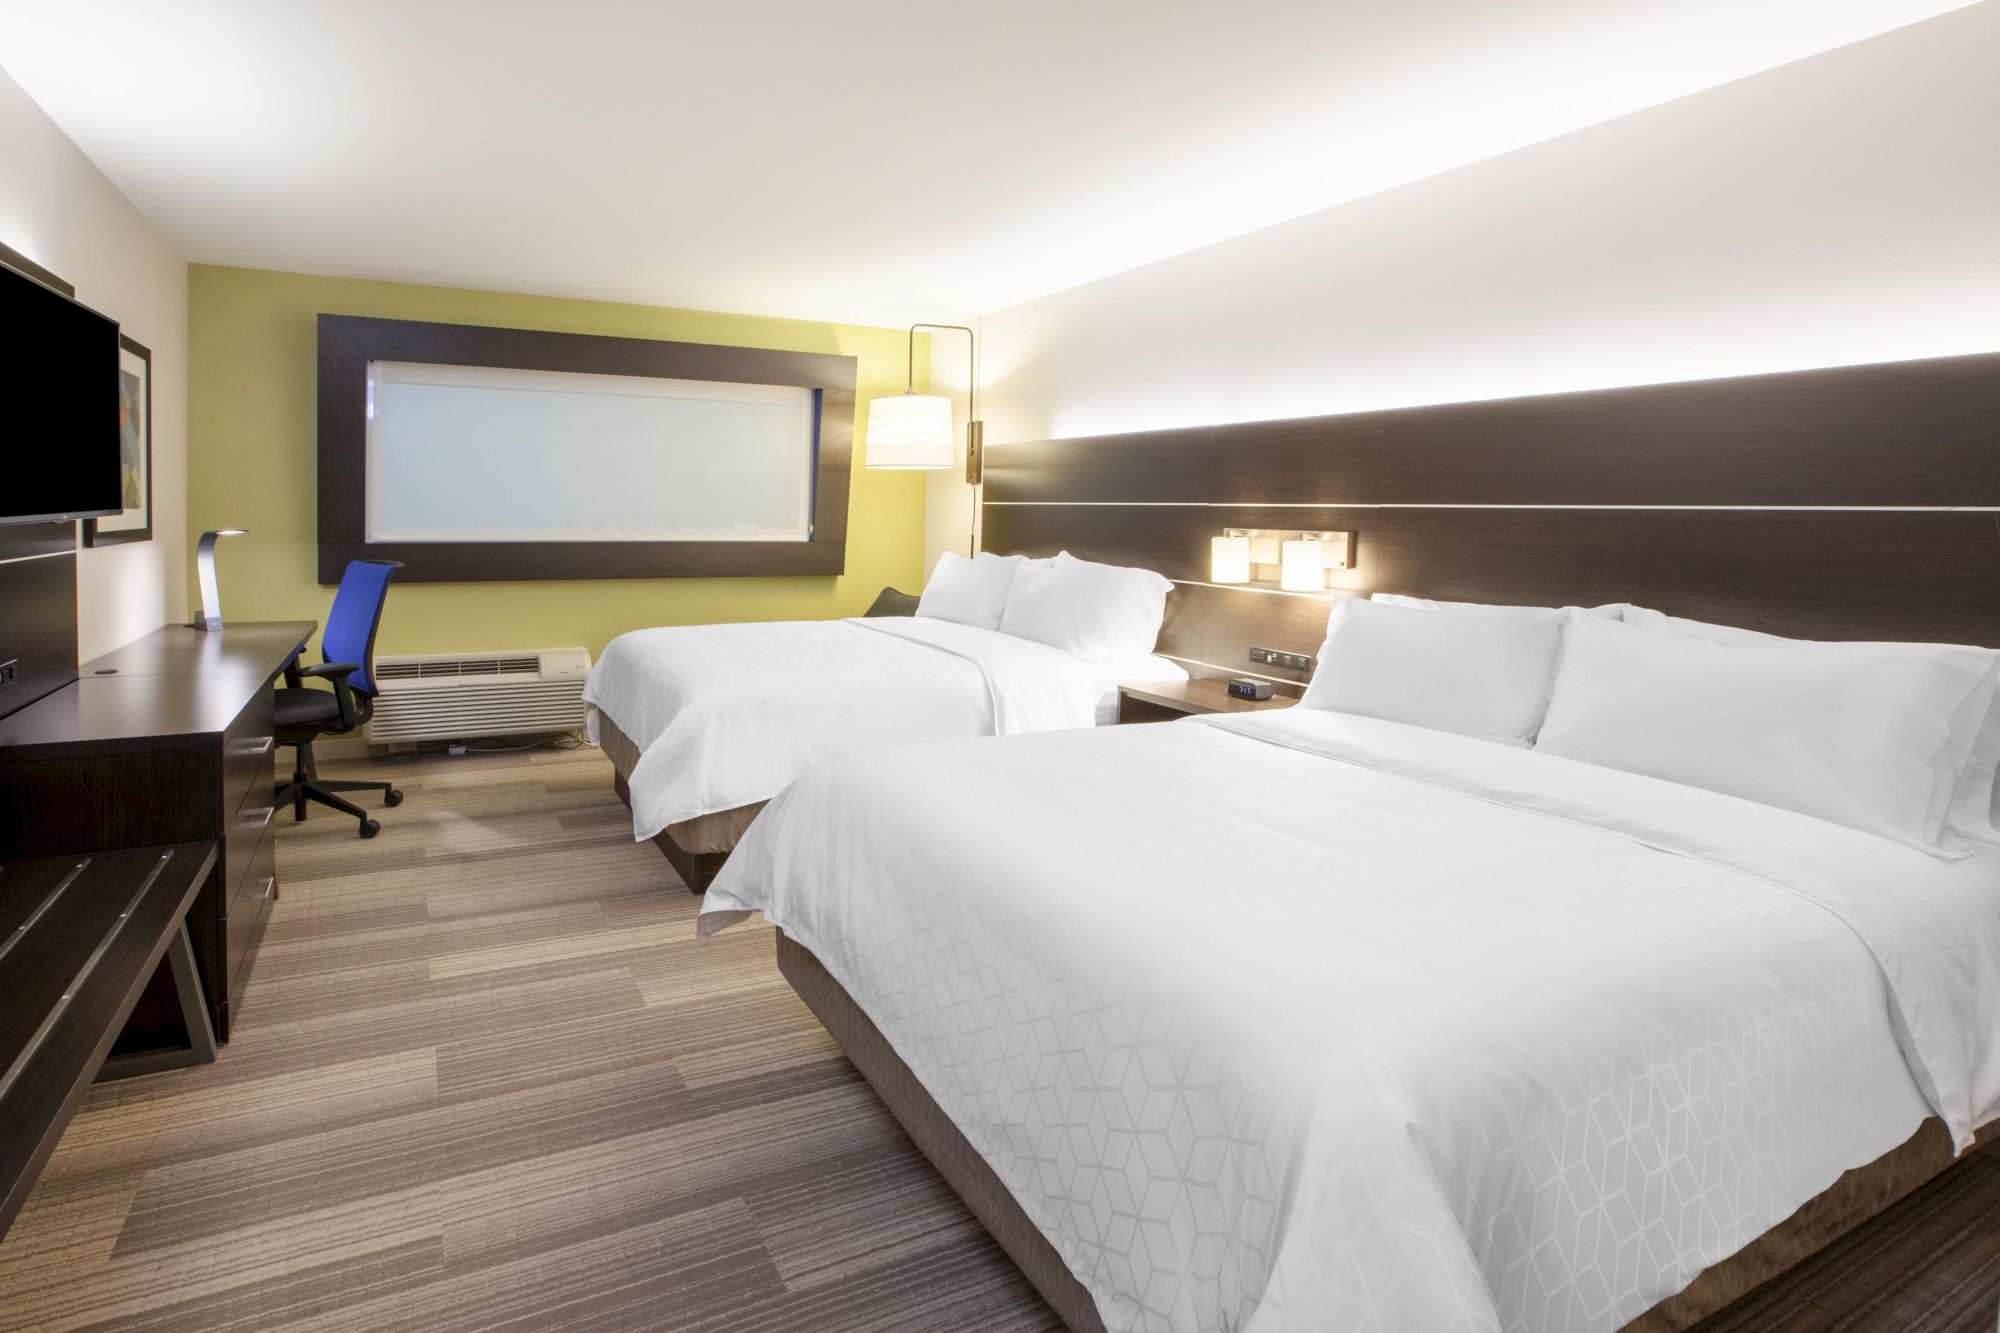 The image shows a modern hotel room with two double beds, a desk and chair, a wall-mounted TV, and contemporary lighting.